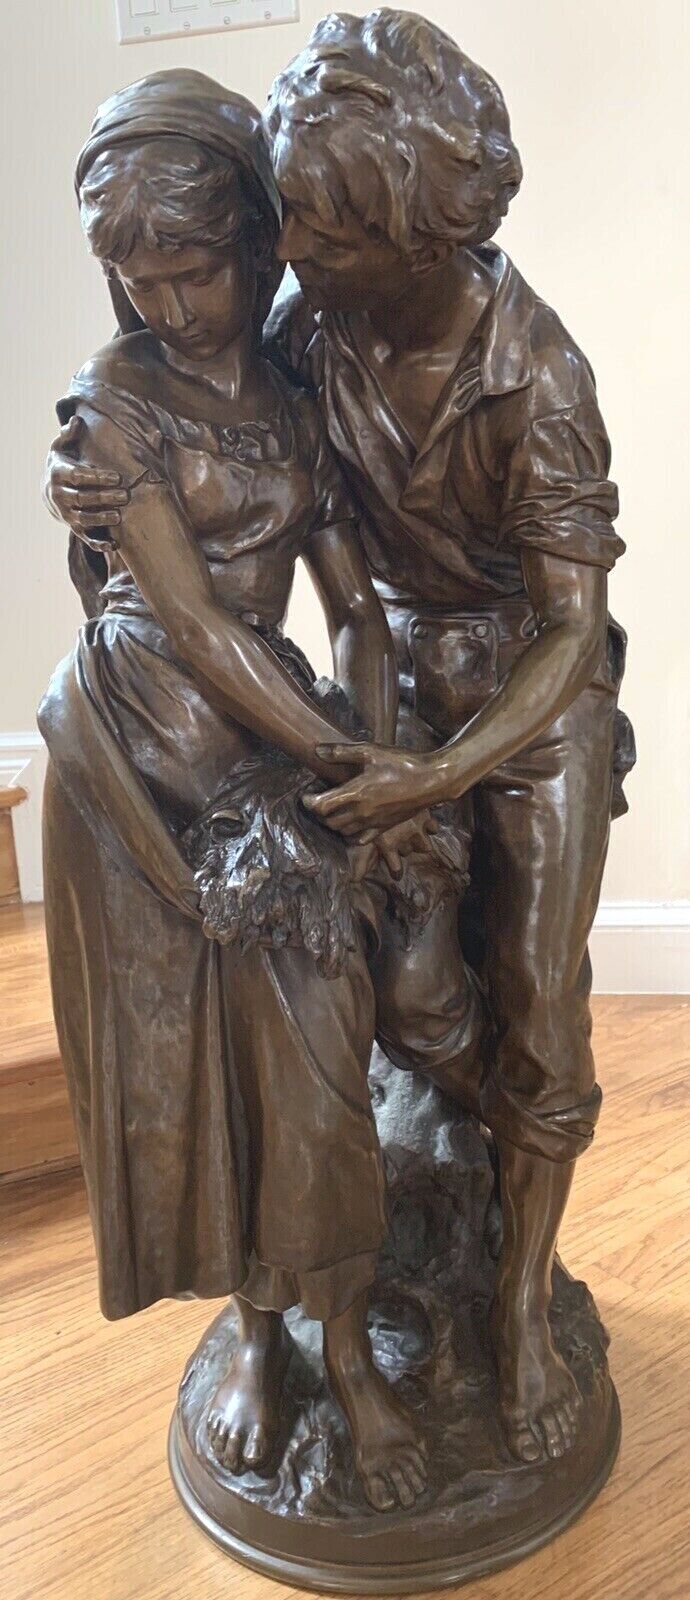 AN IMPORTANT 19 CENTURY FRENCH BRONZE 31\'\' HIGH LOVERS STATUE BY MATH MOREAU